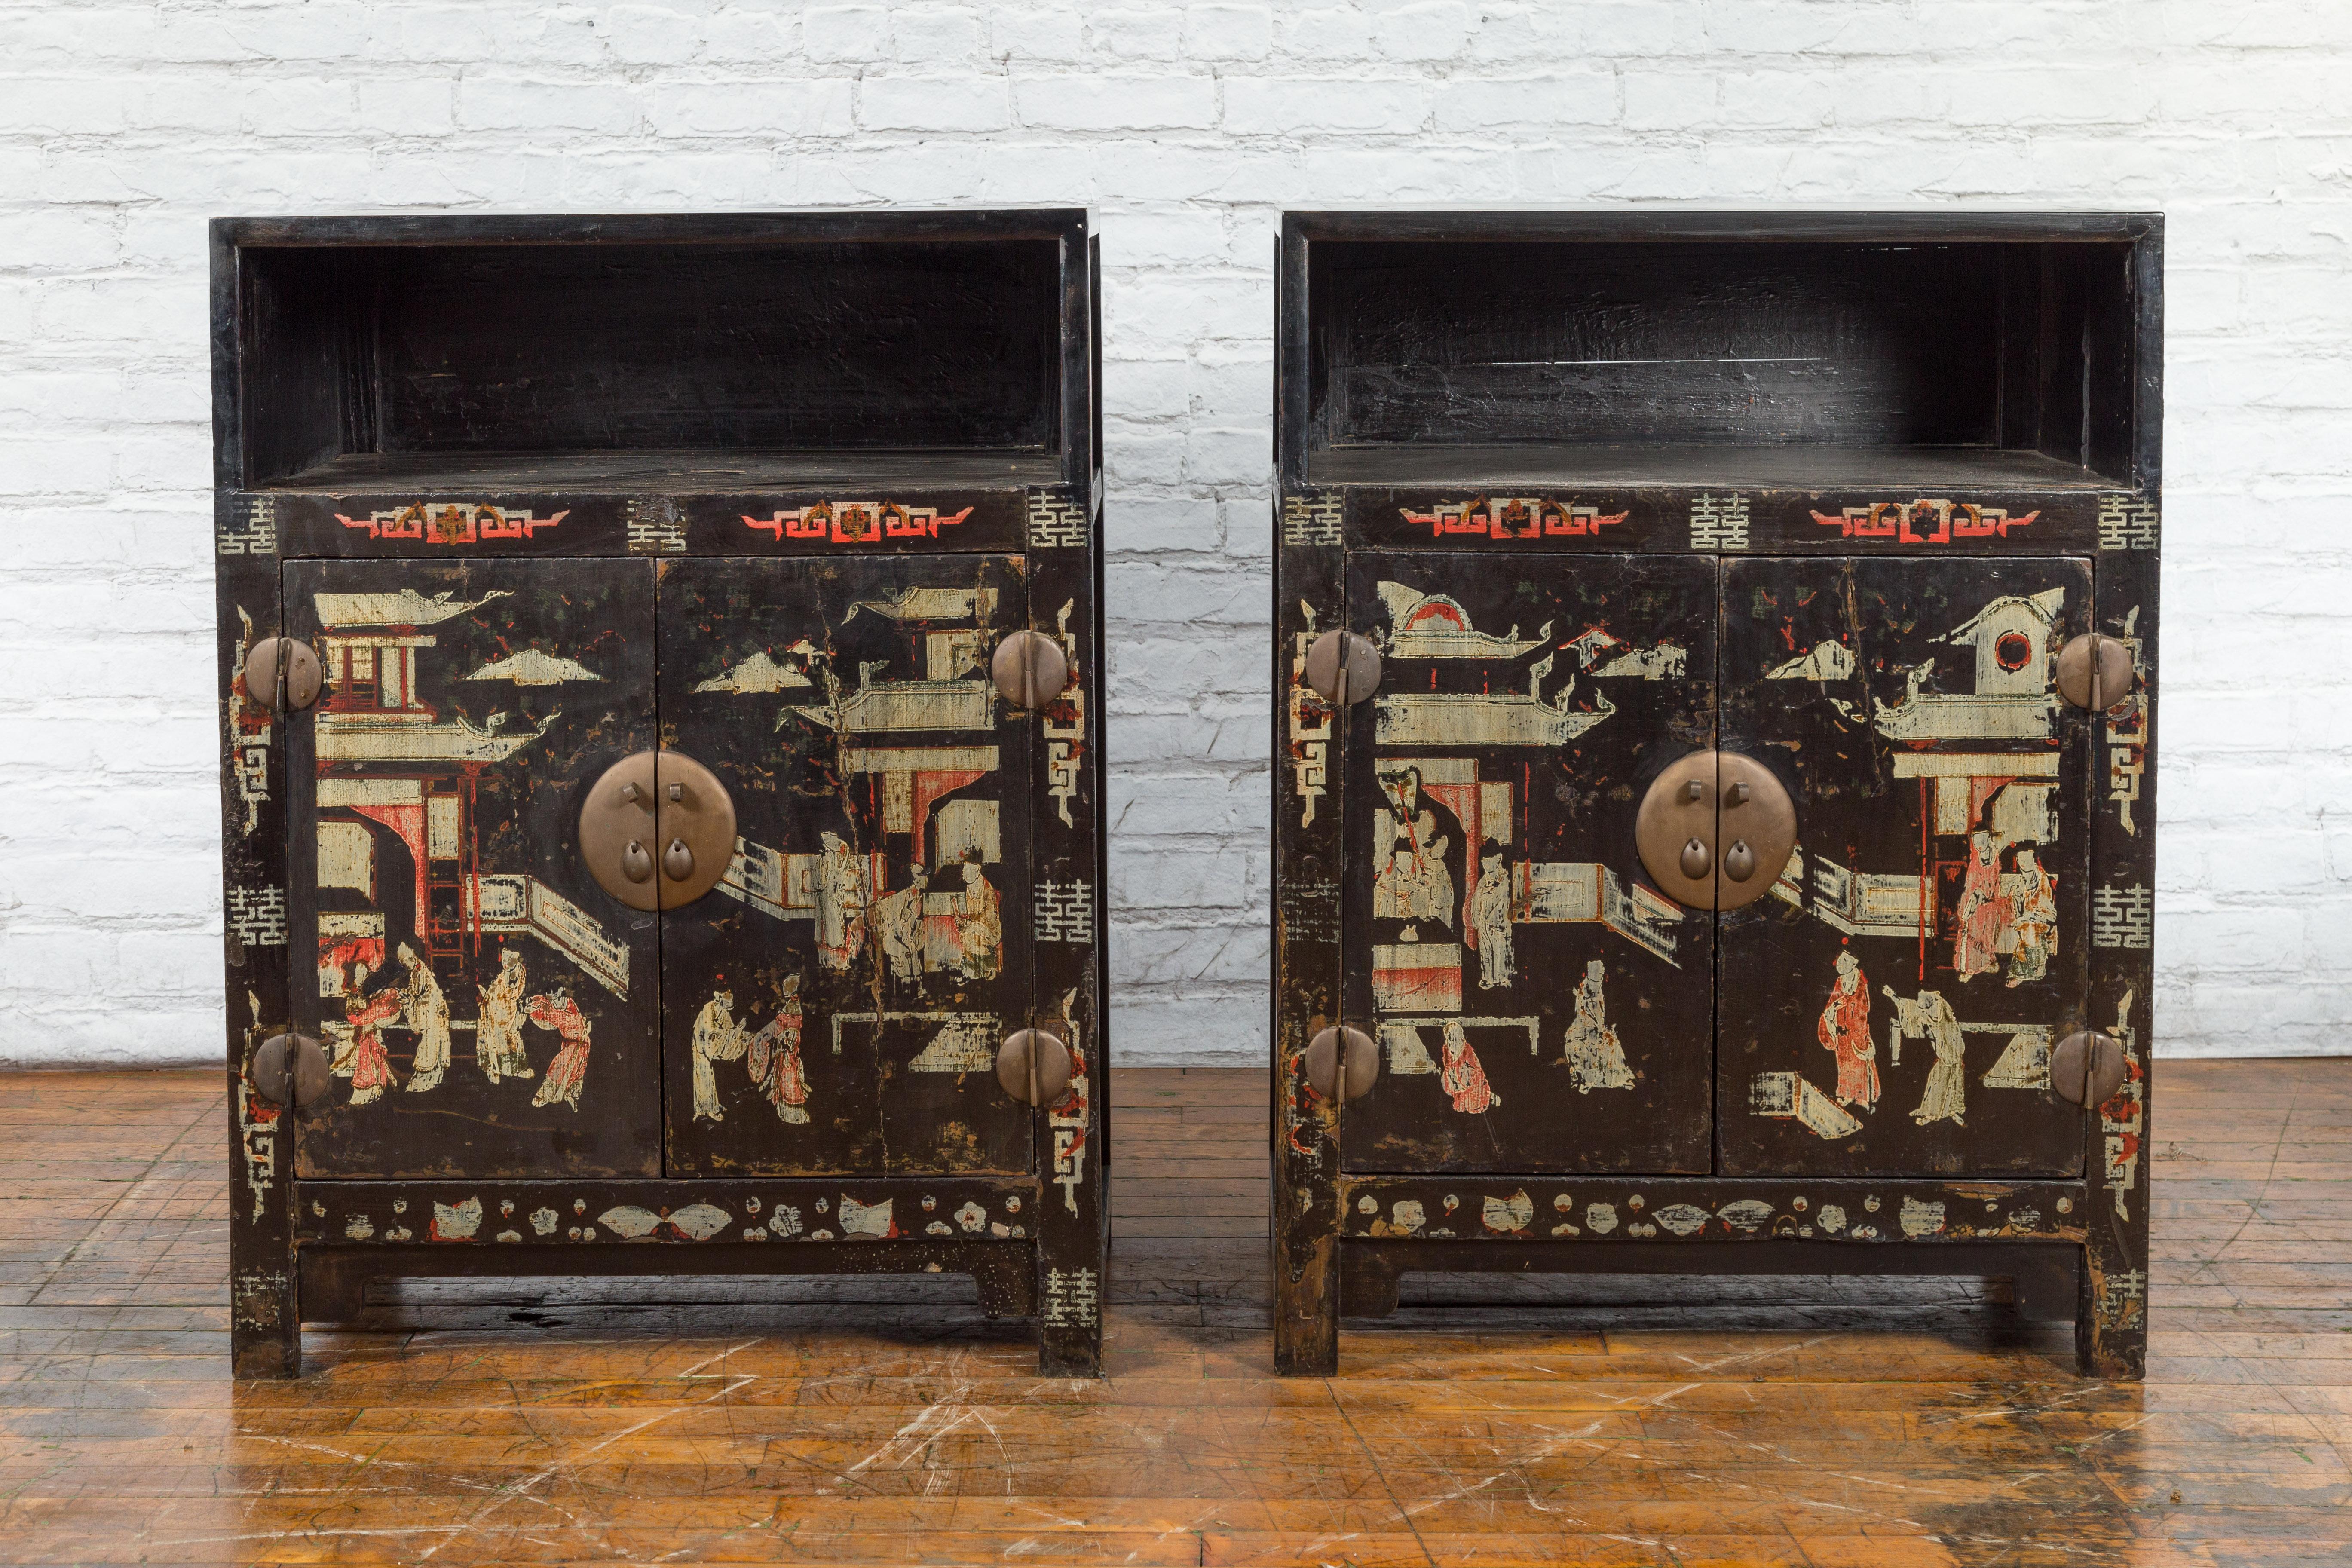 A pair of Chinese Qing Dynasty period black lacquer display cabinets from the 19th century, with hand-painted décor depicting court scenes. Created in China during the Qing Dynasty period in the 19th century, each of this pair of display cabinets